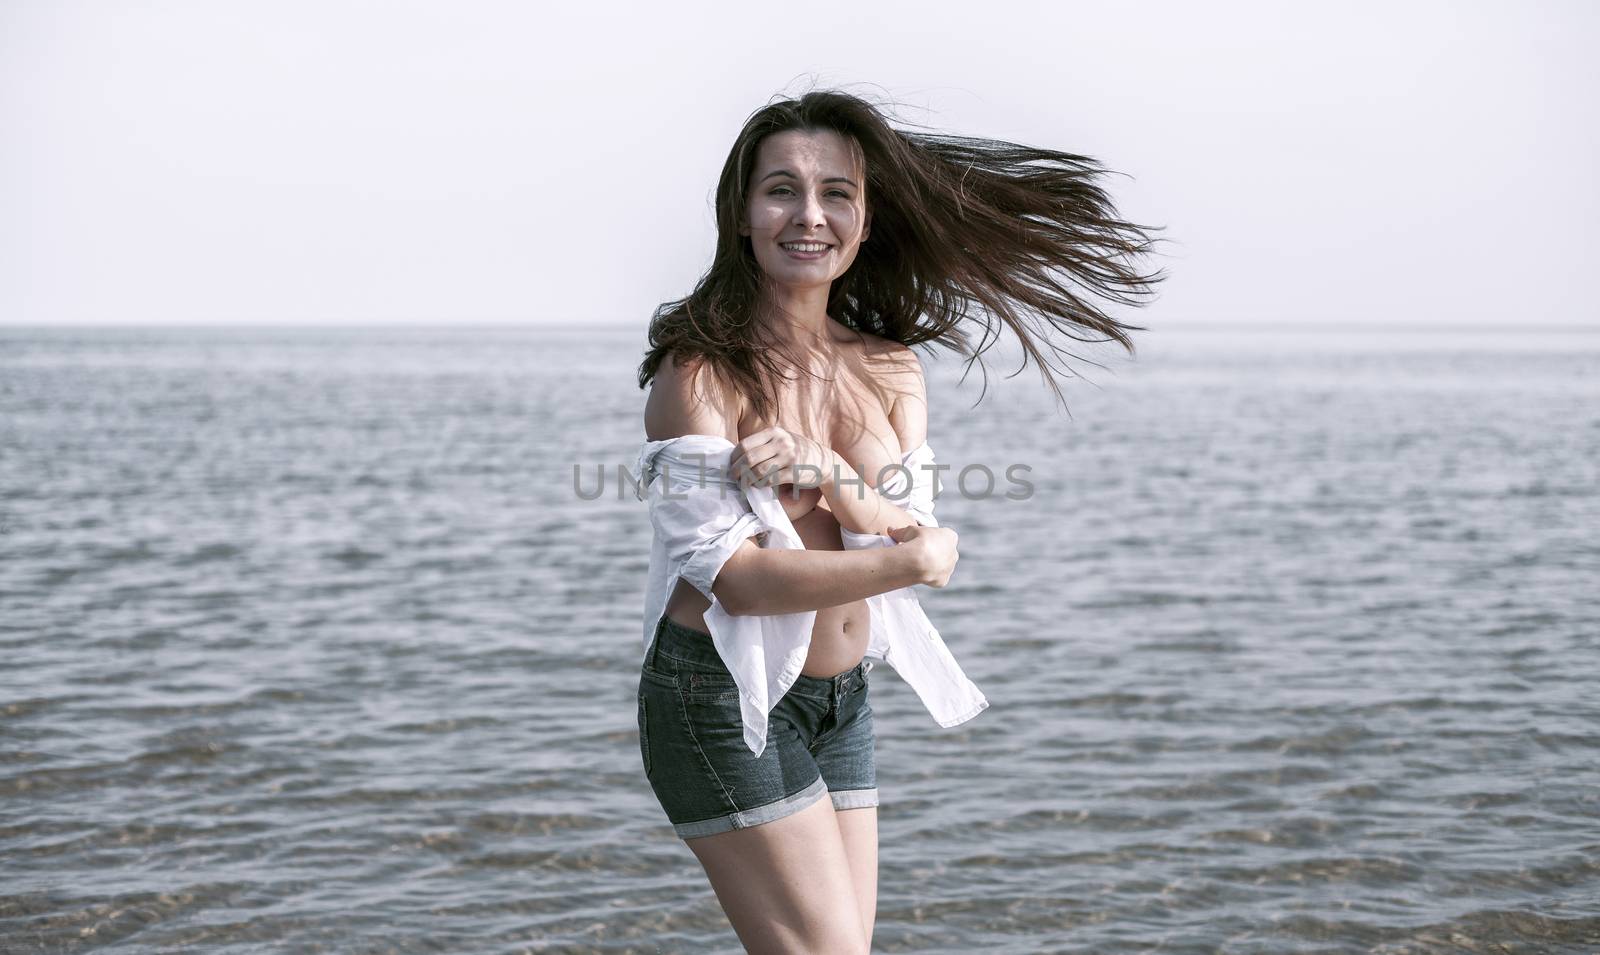 Smiling young woman enjoying her summer vacation on the beach. Beautiful female model having fun on the sea shore.